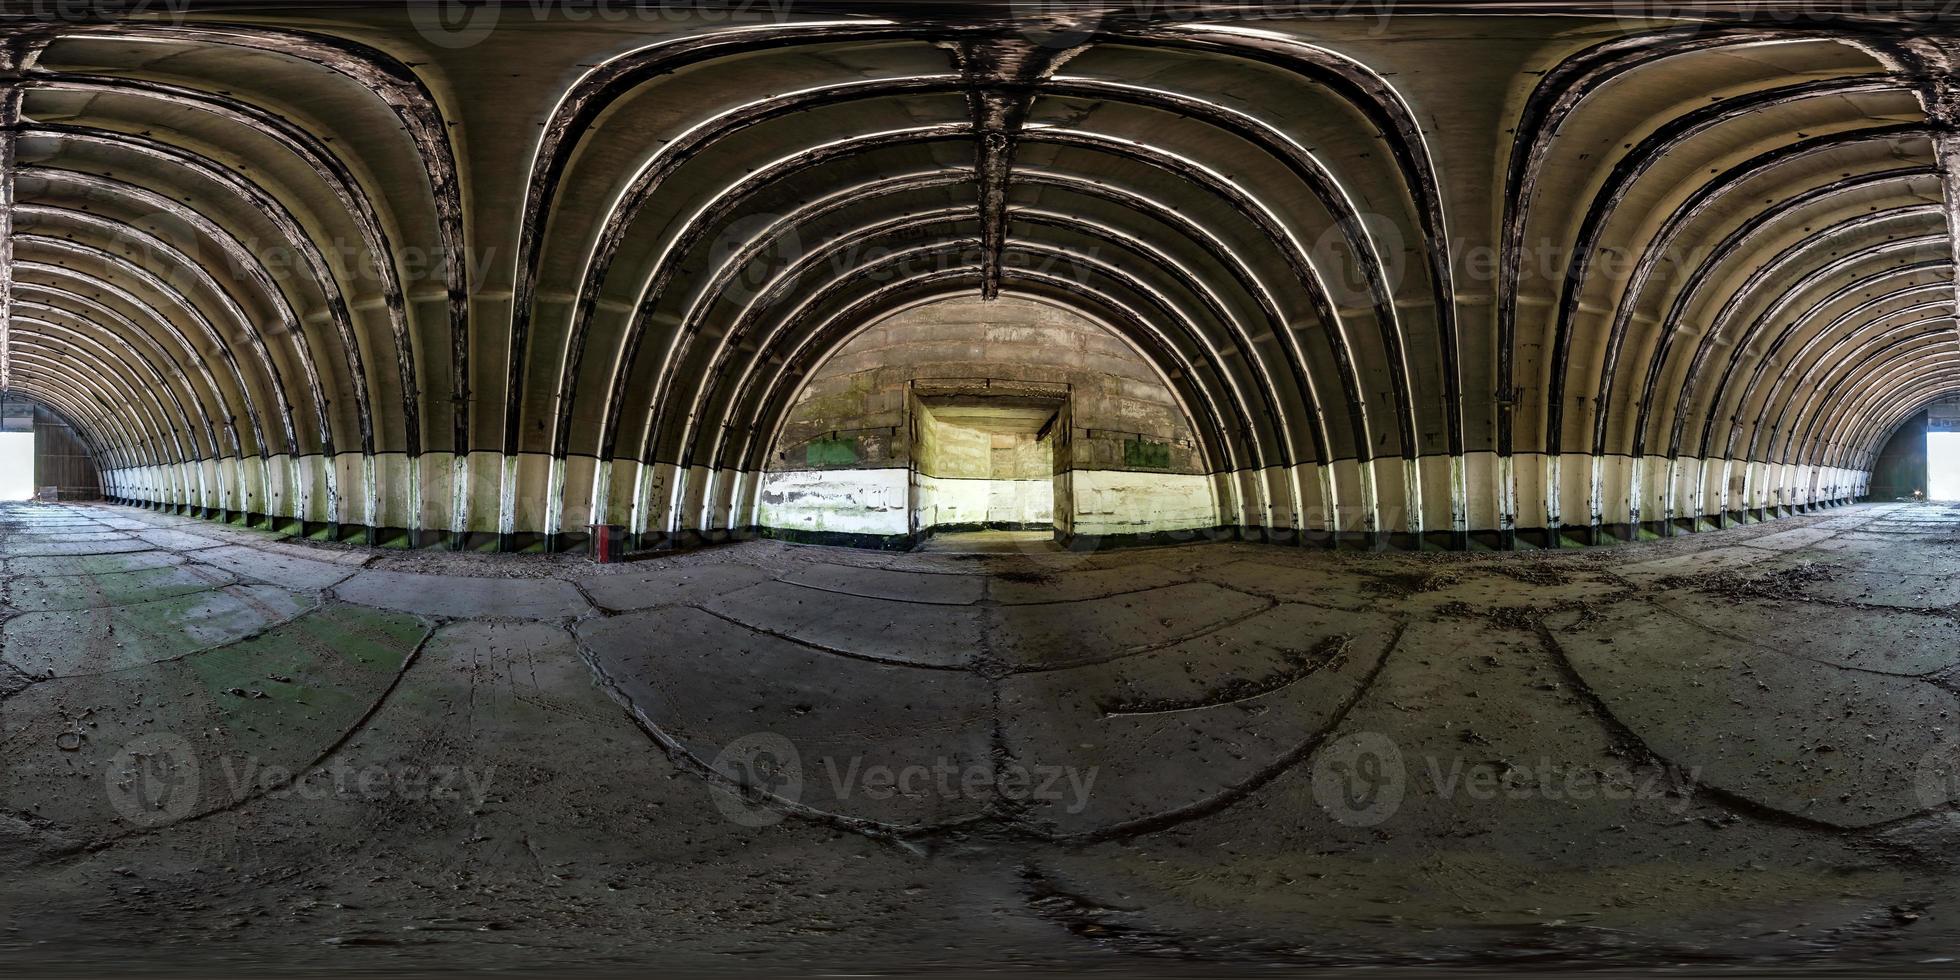 seamless spherical hdri panorama 360 degrees angle view inside of empty old aircraft hangar in equirectangular projection with zenith and nadir, ready for AR VR virtual reality content photo